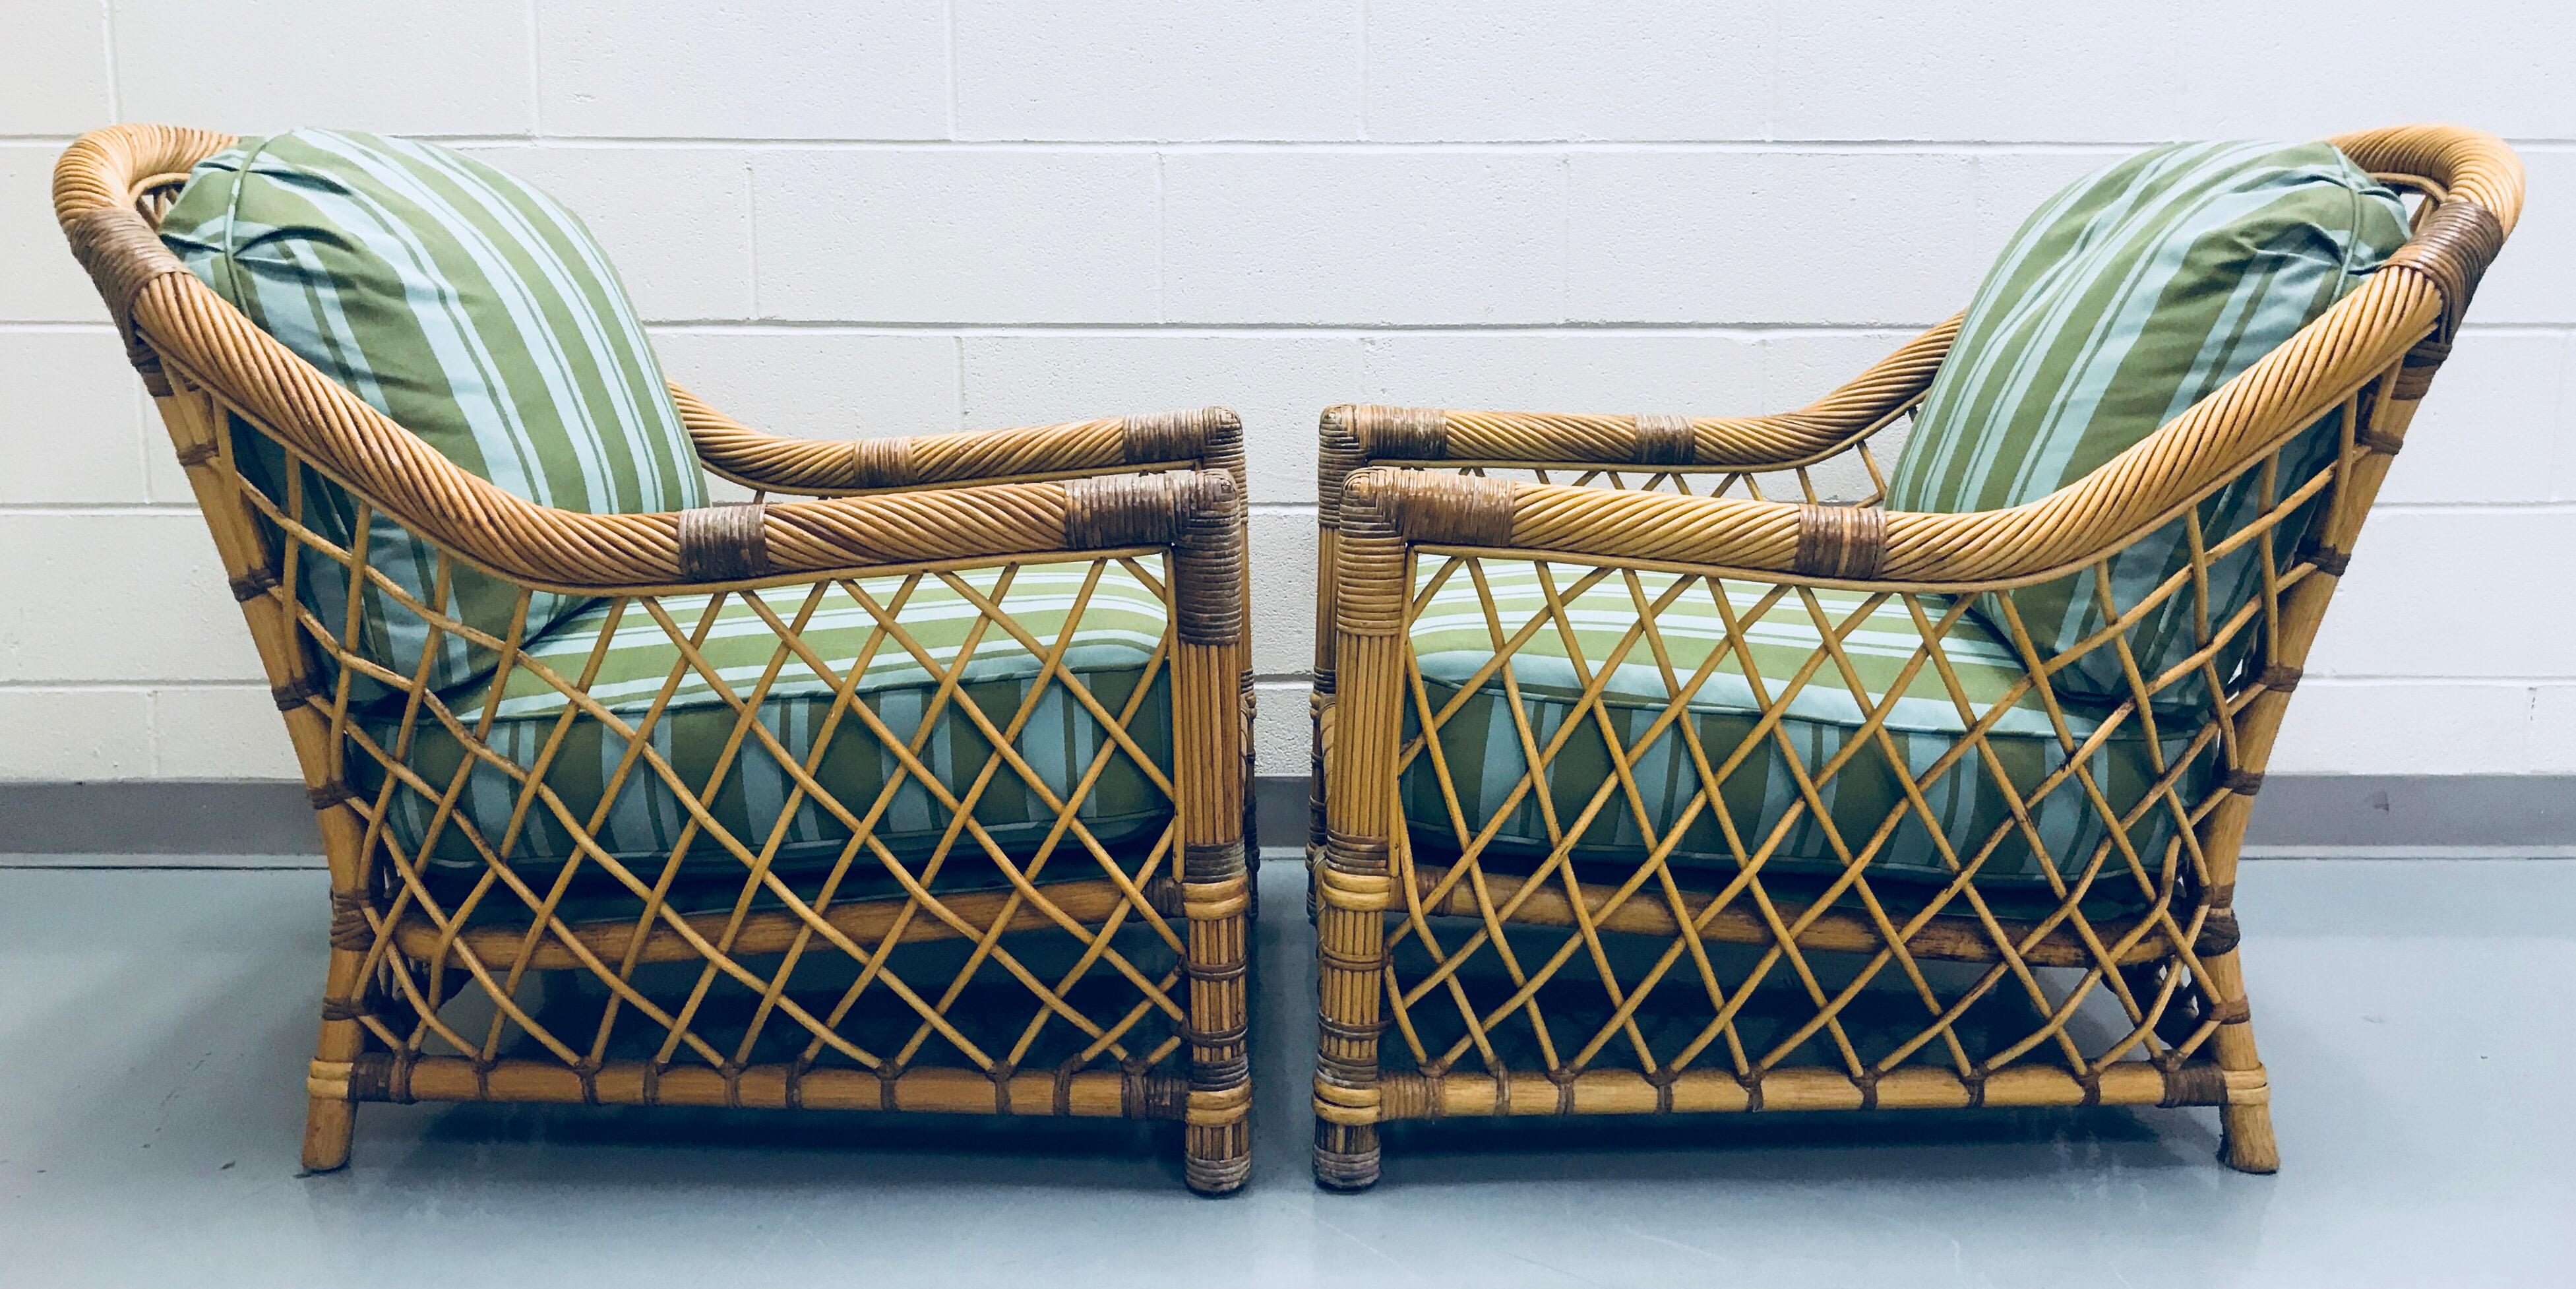 Pair of Bielecky Brothers rattan and wicker lounge chairs, USA, 1980s.